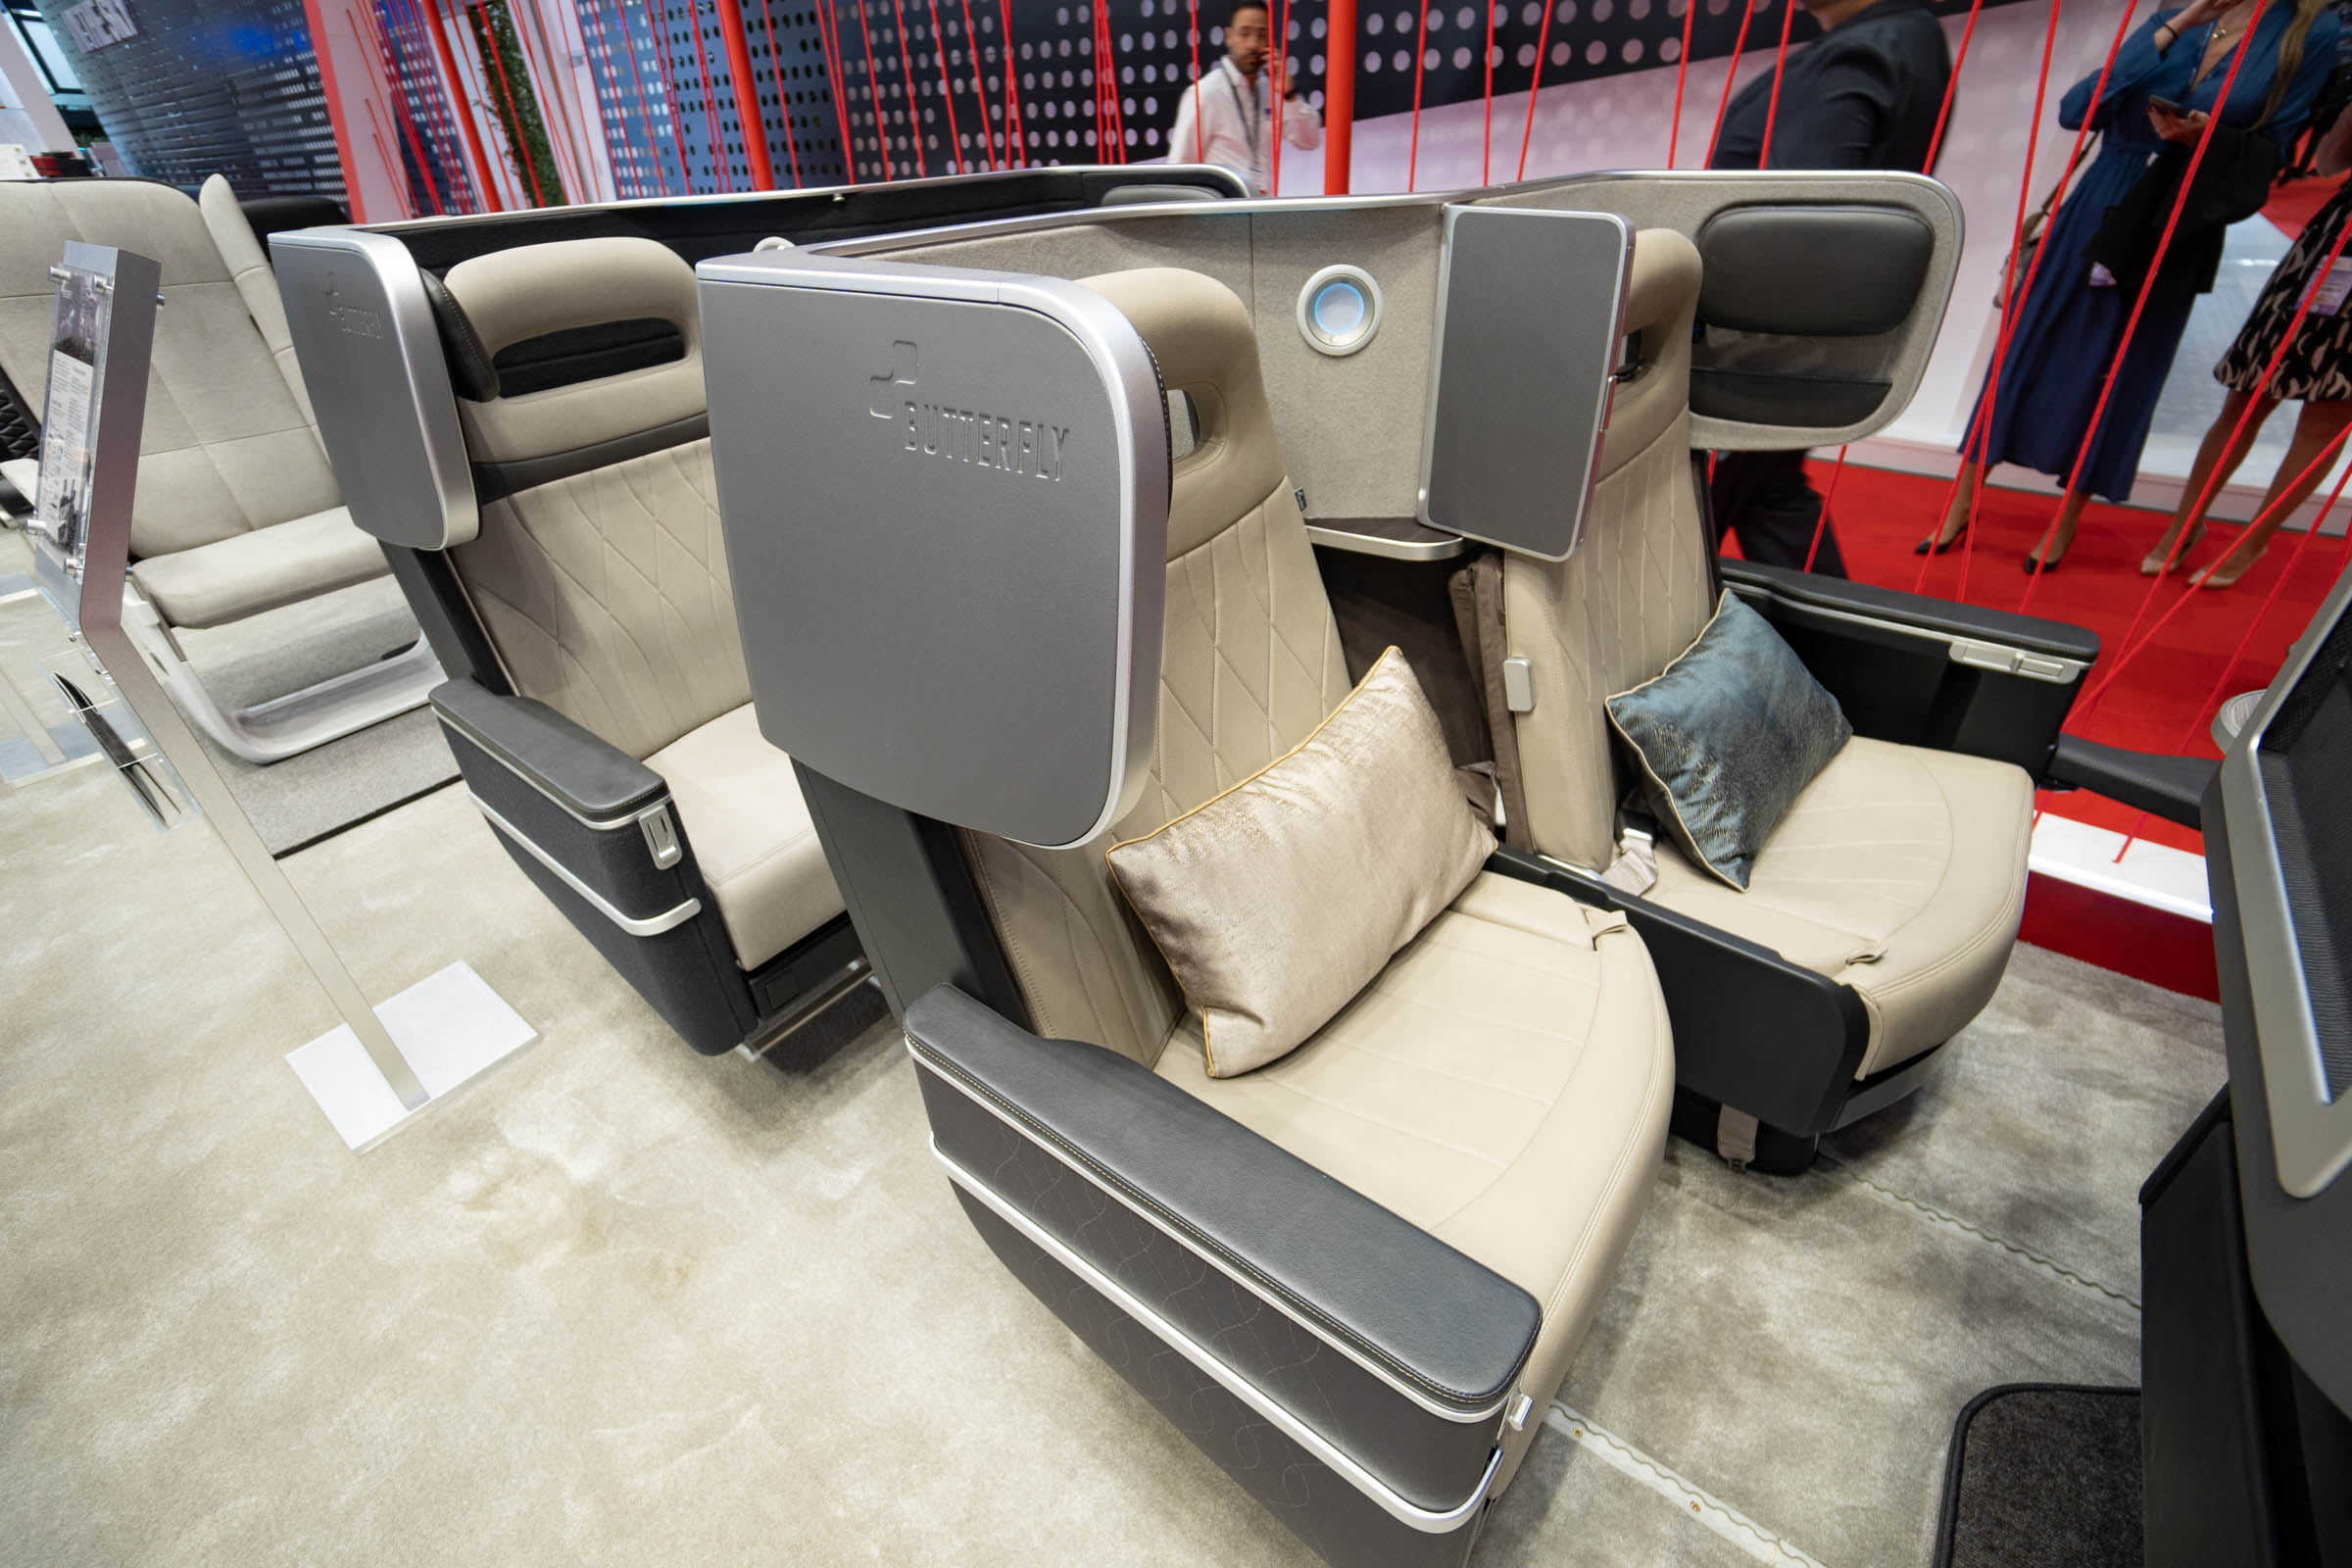 This New Airplane Seat Design Allows Economy Class Passengers To